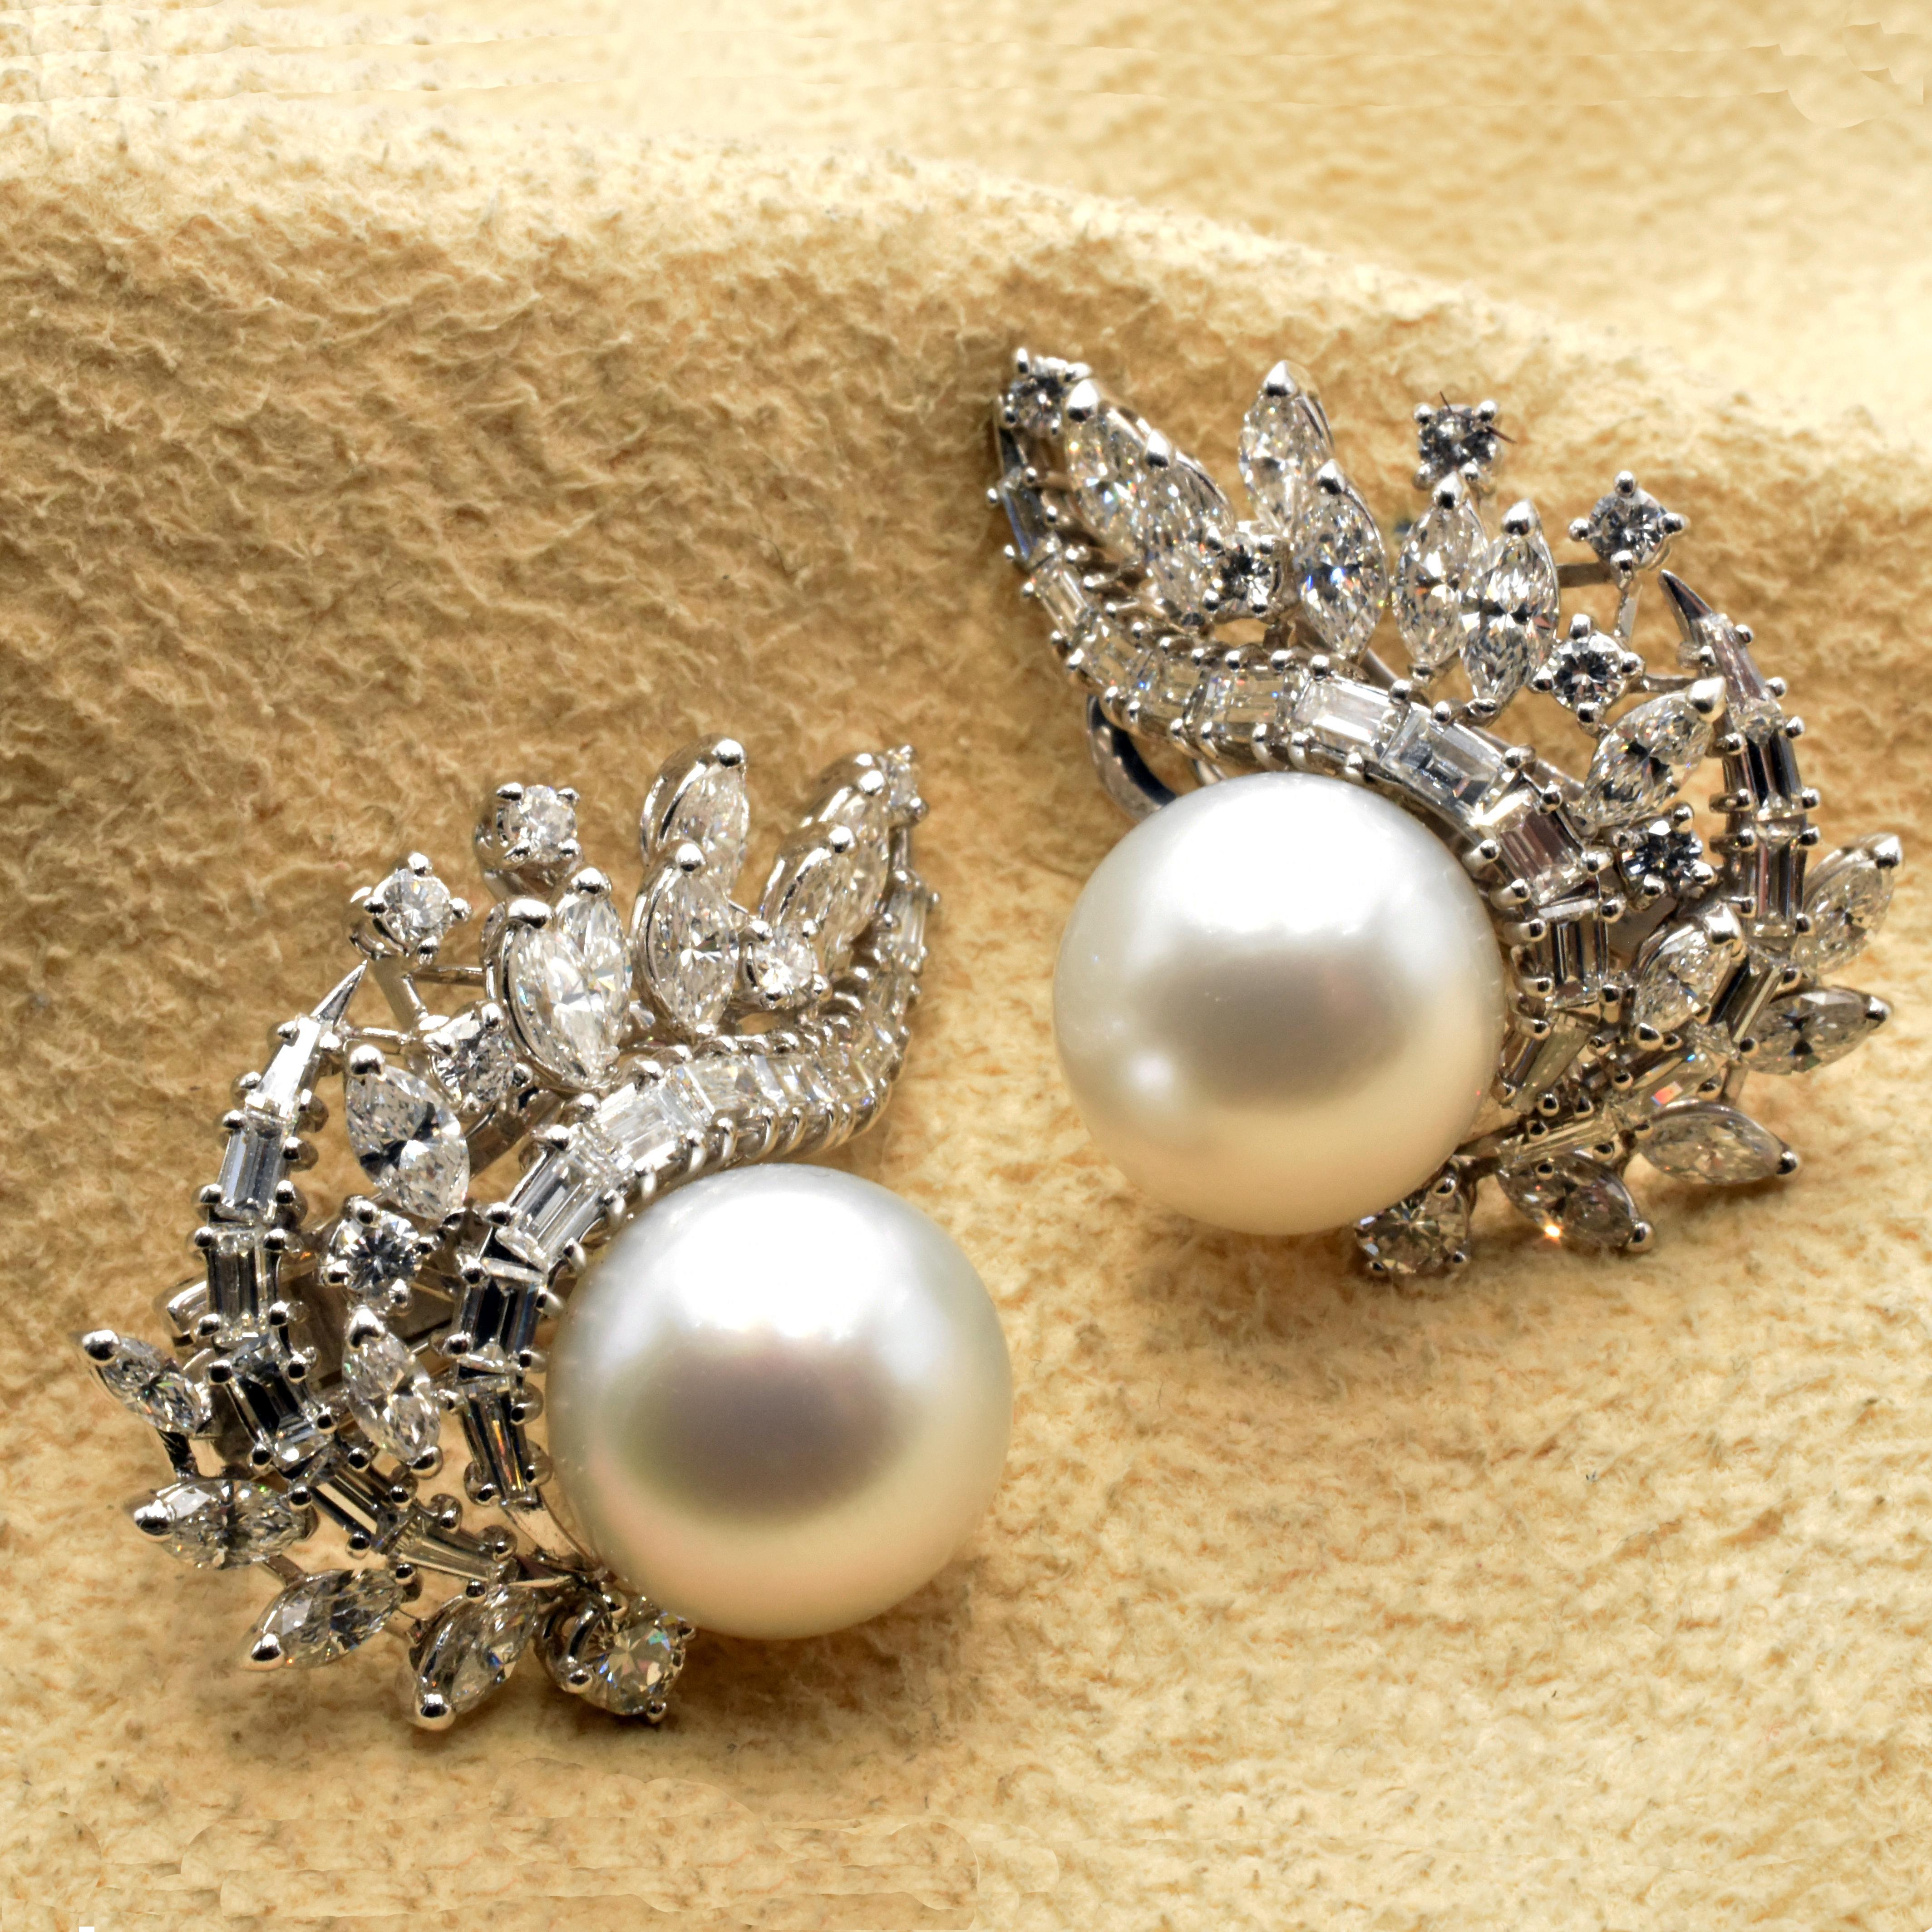 Gilberto Cassola 18Kt White Gold Earrings with 12.50 mm White South Sea Pearls, White Marquise and Baguette Cut Diamonds.
12.50 mm South Sea Pearls, total weight of ct 32.00.
Exceptional Luster and no abrasions on surface. White Color.
F Color Vs